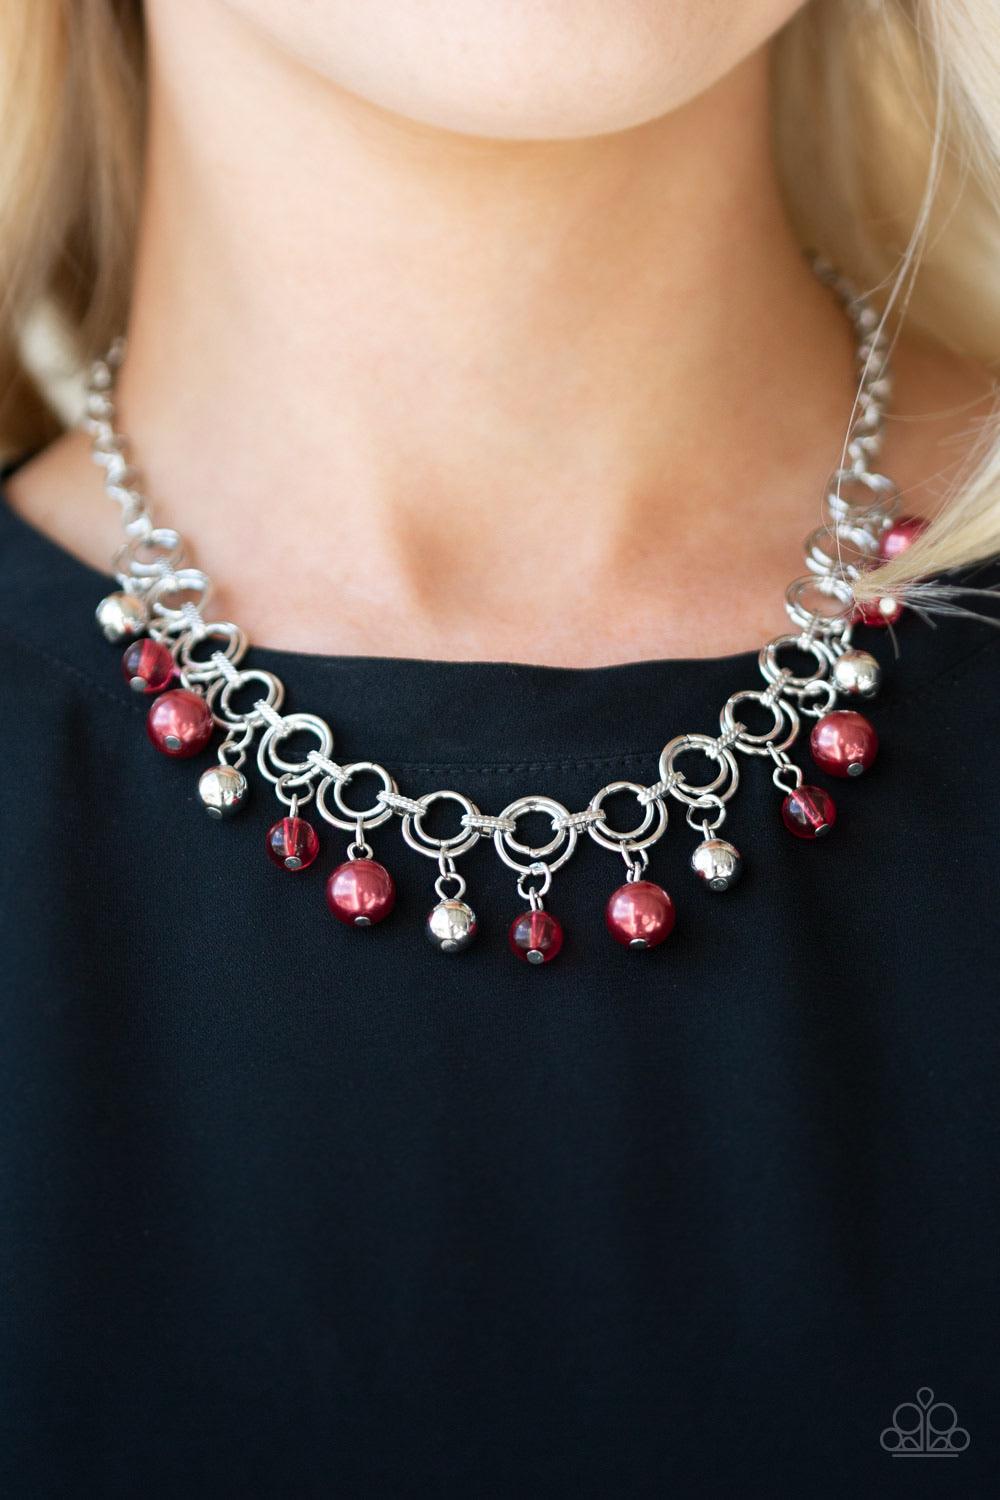 Paparazzi Accessories Fiercely Fancy - Red Featuring pearly and glassy finishes, an array of silver and red beads swing from a double-linked silver chain, creating a fancy fringe below the collar. Features an adjustable clasp closure. Sold as one individu